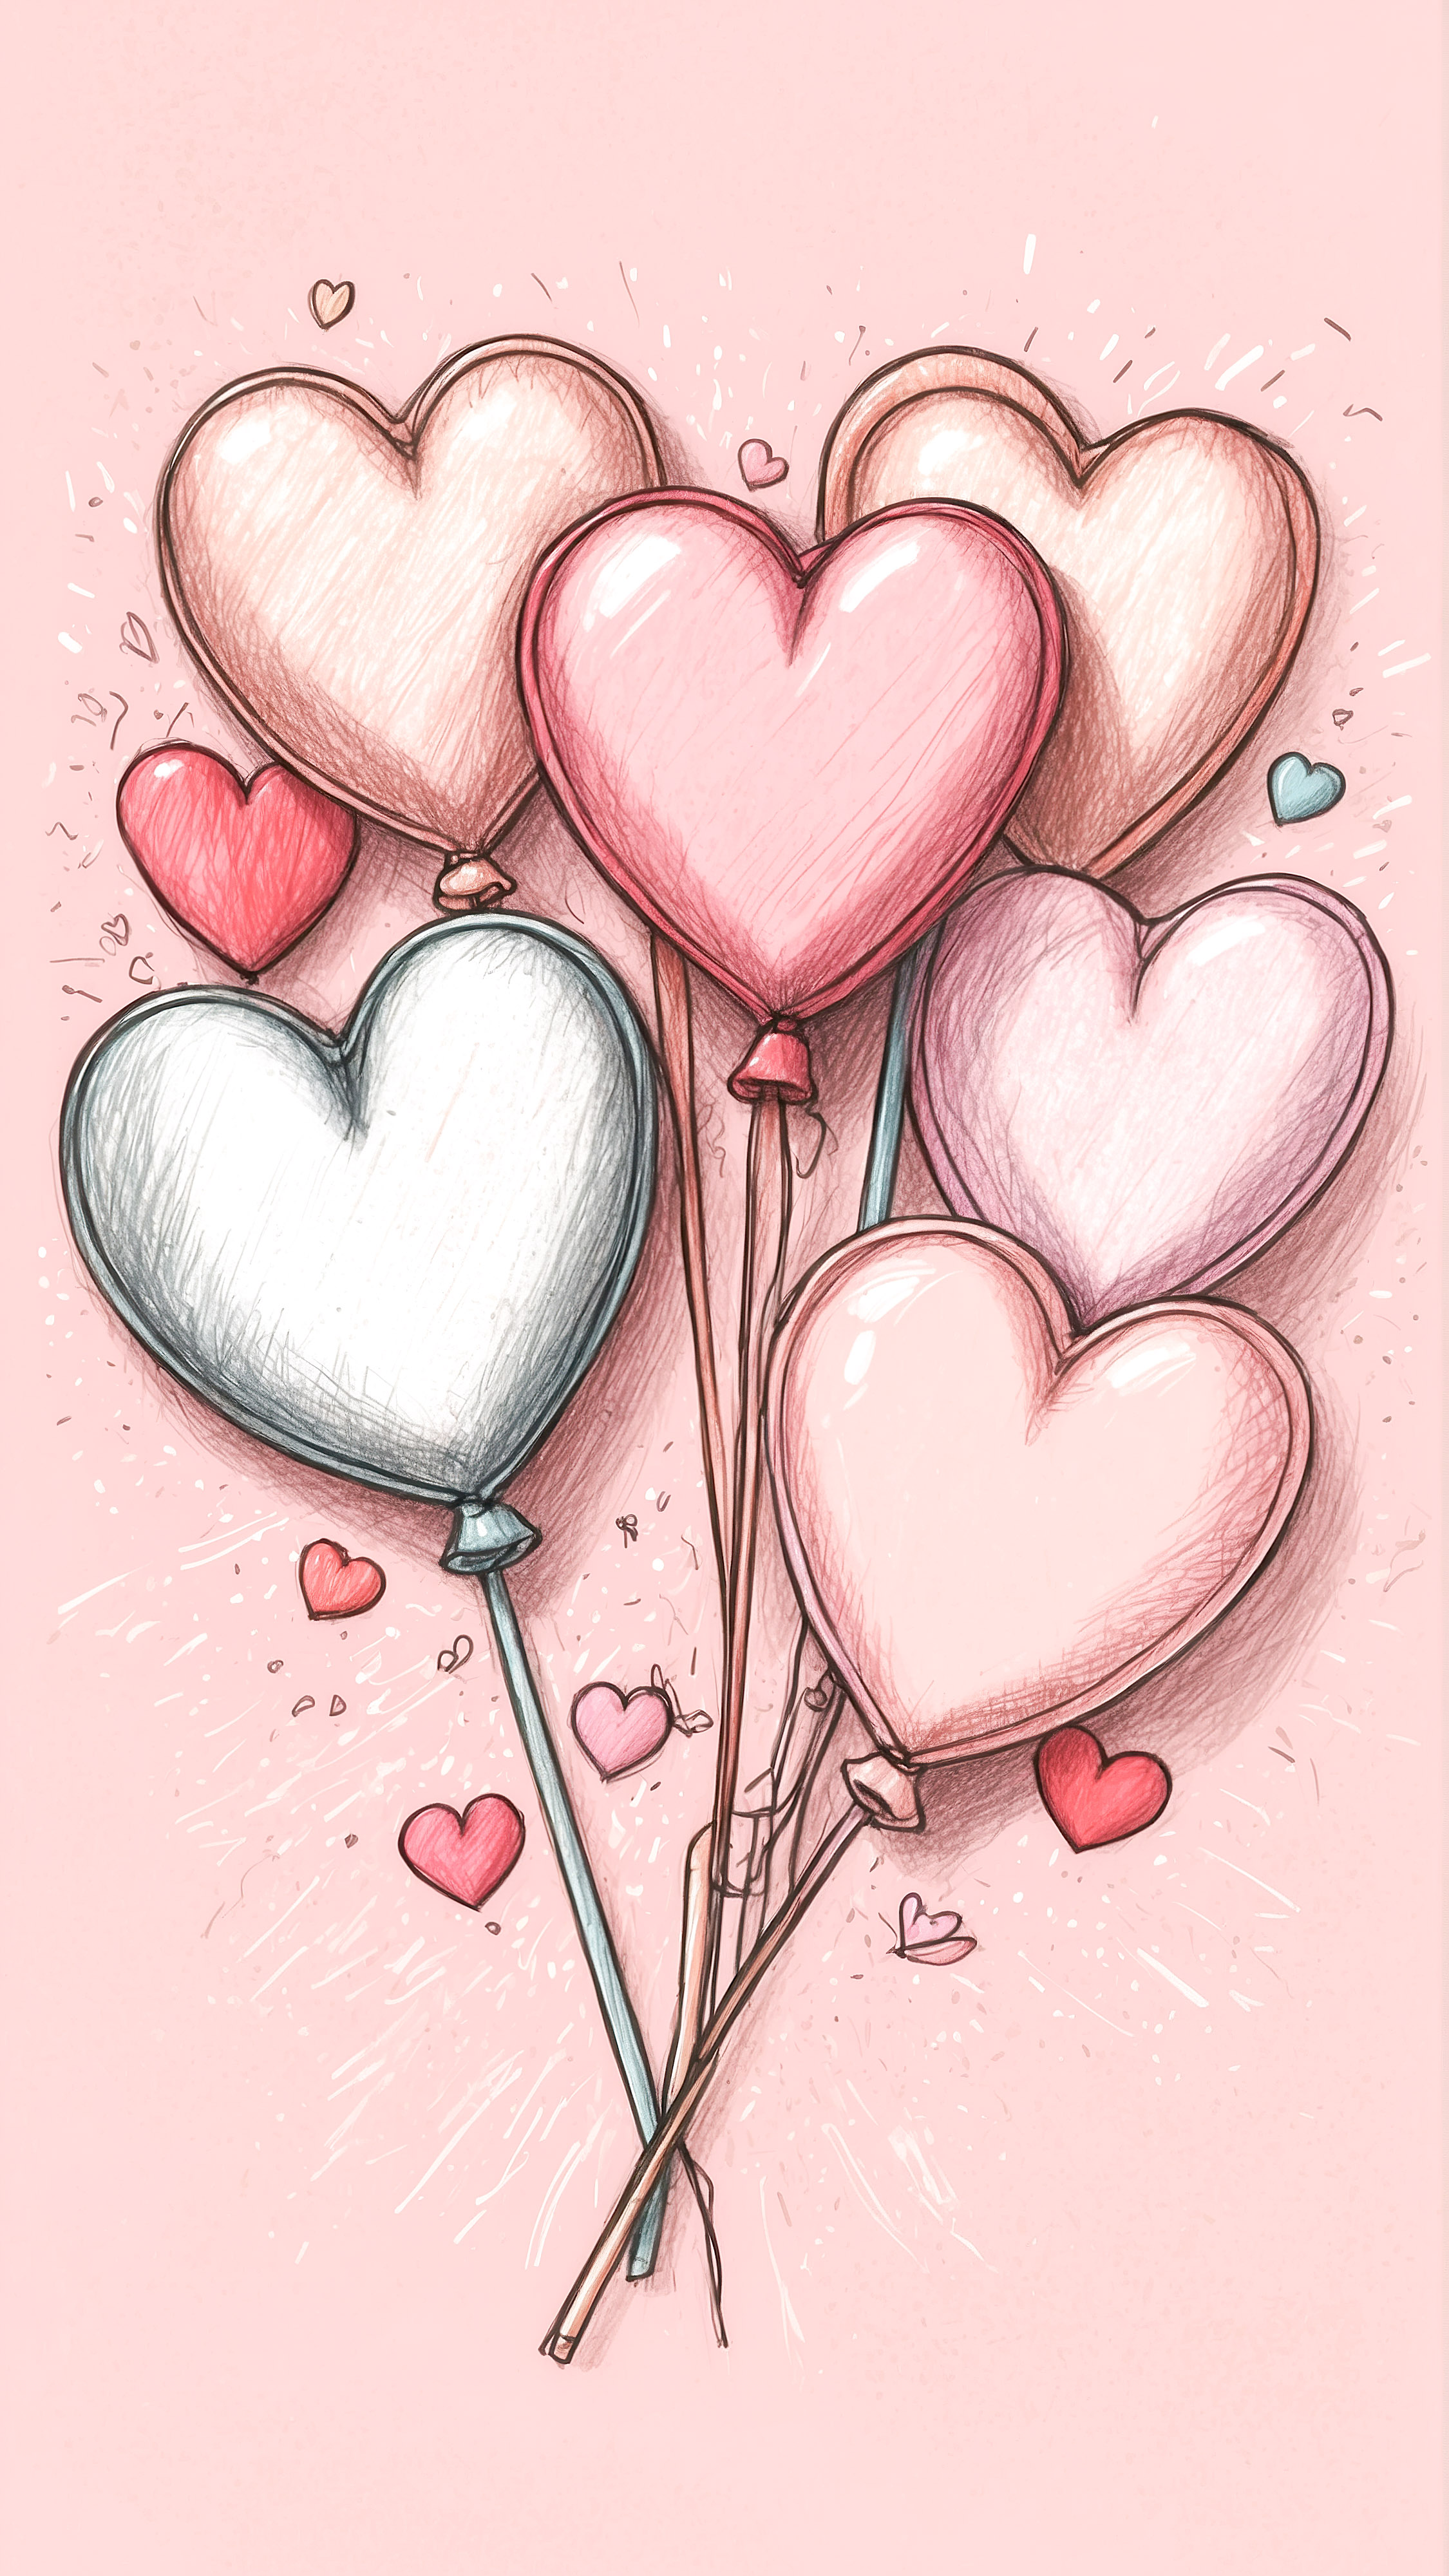 Get lost in the charm of heart-themed elements such as a heart-shaped lollipop, balloon, and love letter, scattered against a light pink background, with a specially designed cute background for your iPhone.